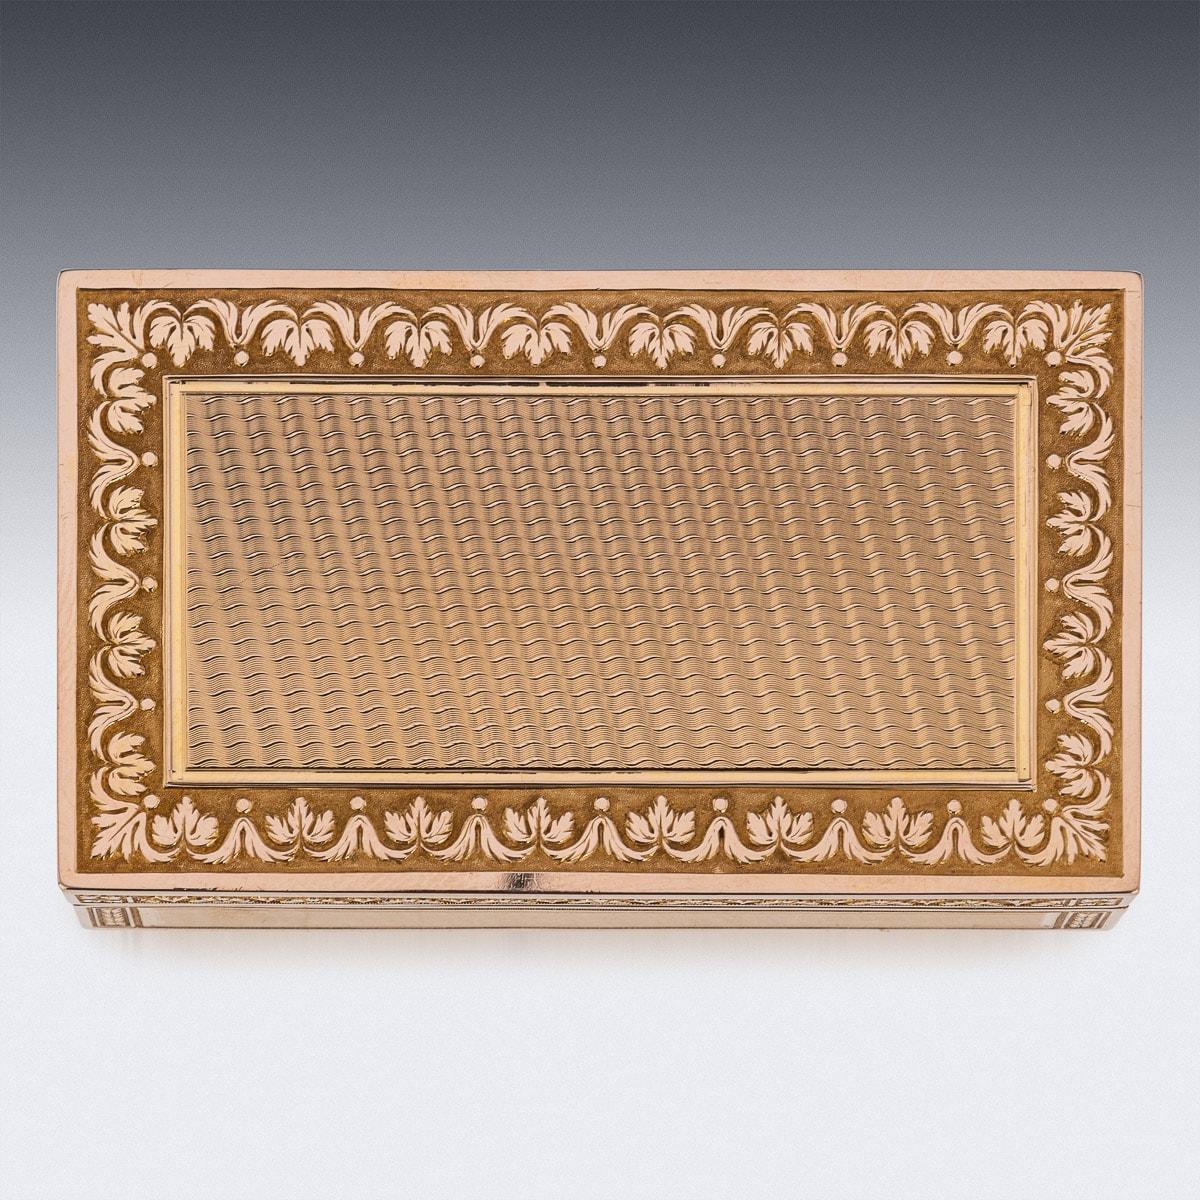 Antique mid-19th century French 18 carat gold snuff box, of traditional form. The base, sides and the cover deorated with engine turning within engraved acanthus leaf borders on matted ground. Hallmarked French Gold (750 standard), Guarantee mark